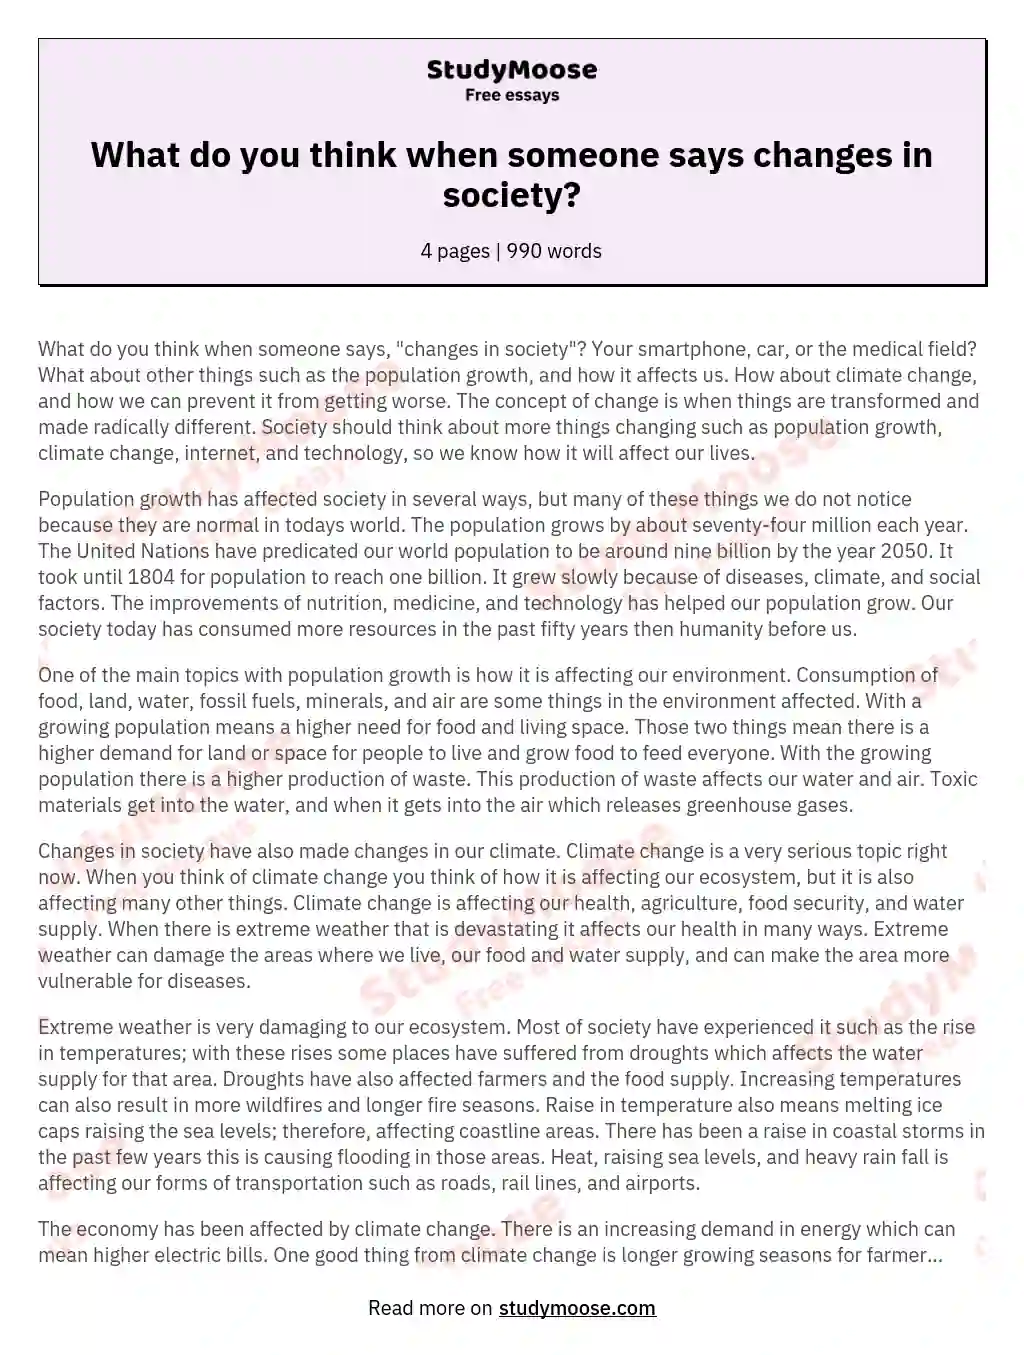 What do you think when someone says changes in society? essay